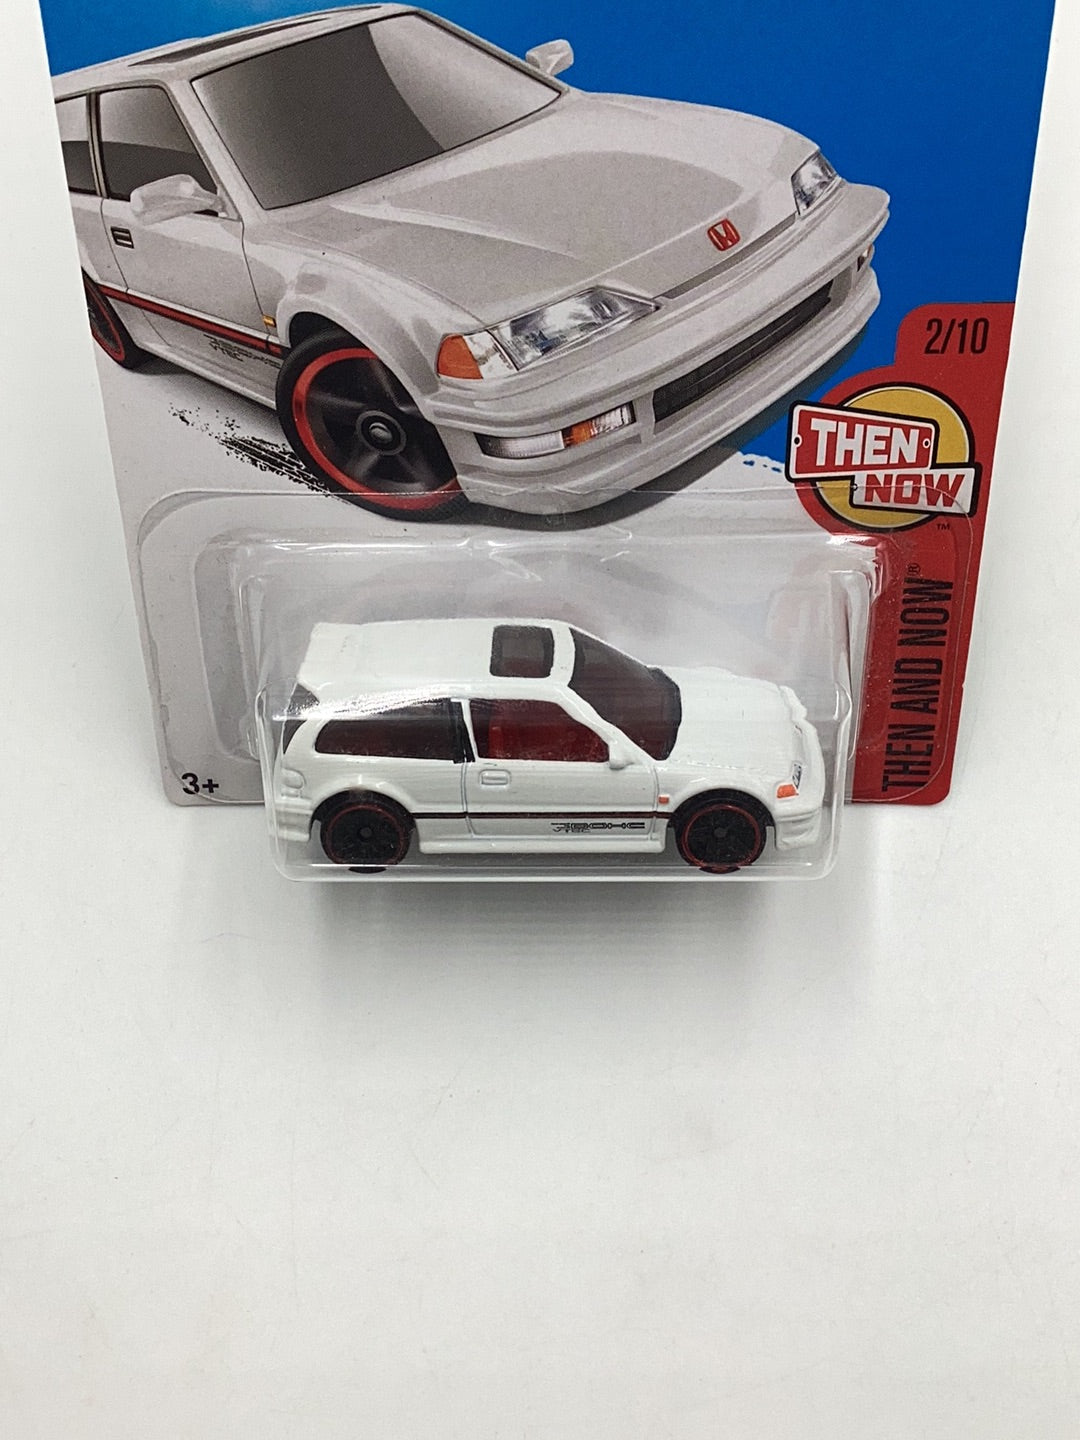 2017 Hot Wheels #330 Then and Now 90 Honda Civic EF 76A